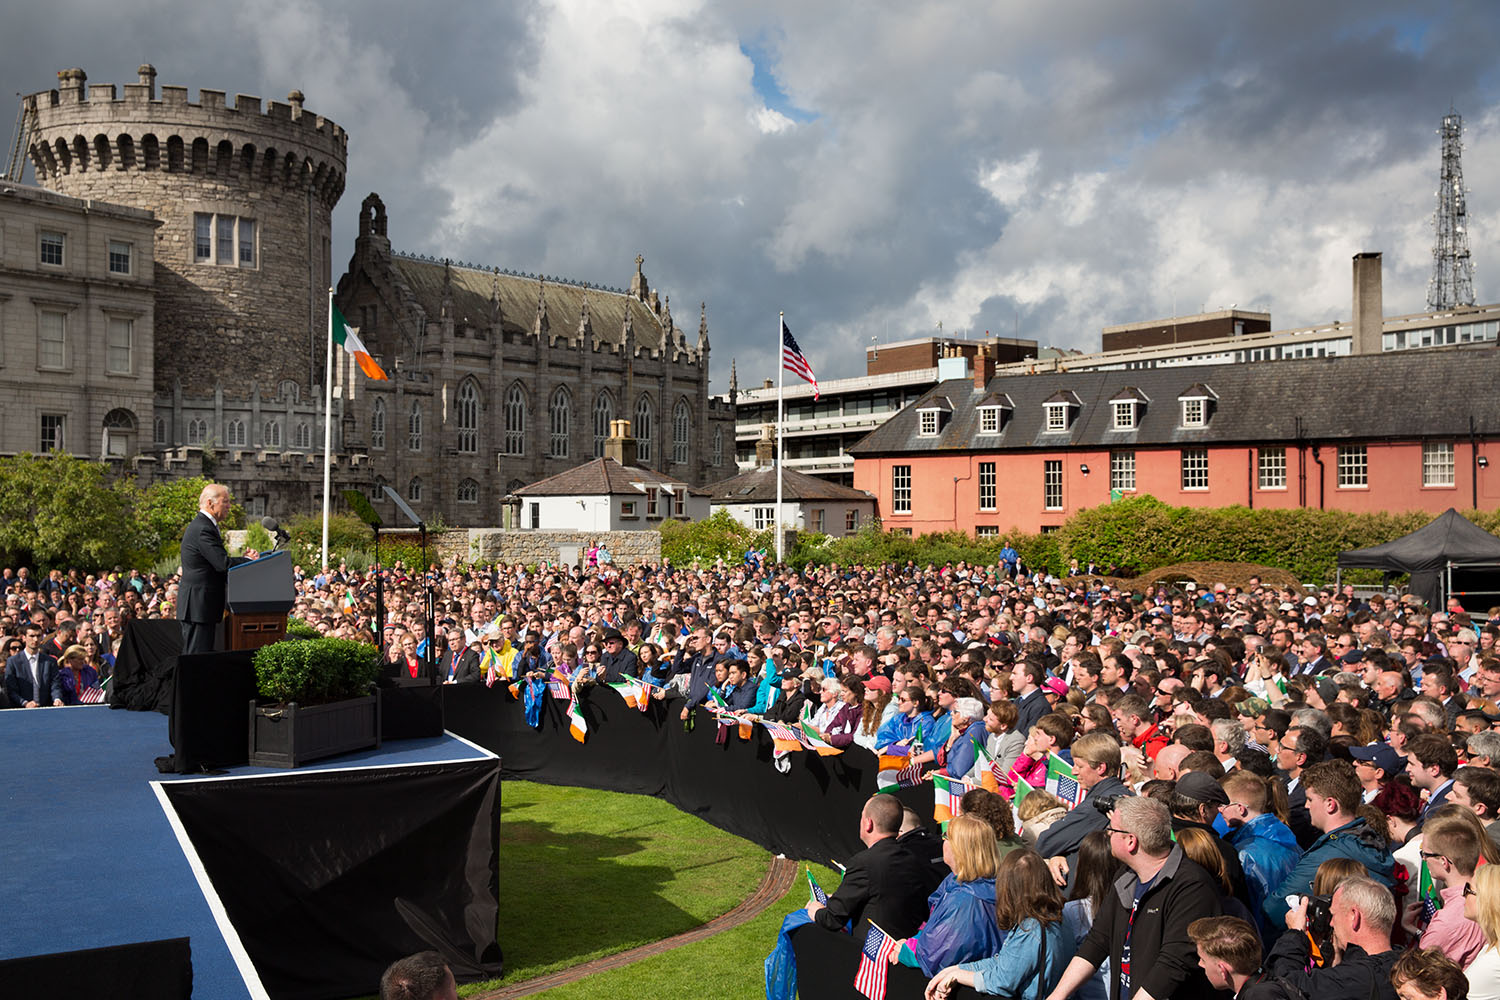 Vice President Joe Biden delivers remarks on the shared heritage of our two nations, and the values of tolerance, diversity and inclusiveness, at Dublin Castle in Dublin, Ireland, June 24, 2016. (Official White House Photo by David Lienemann)